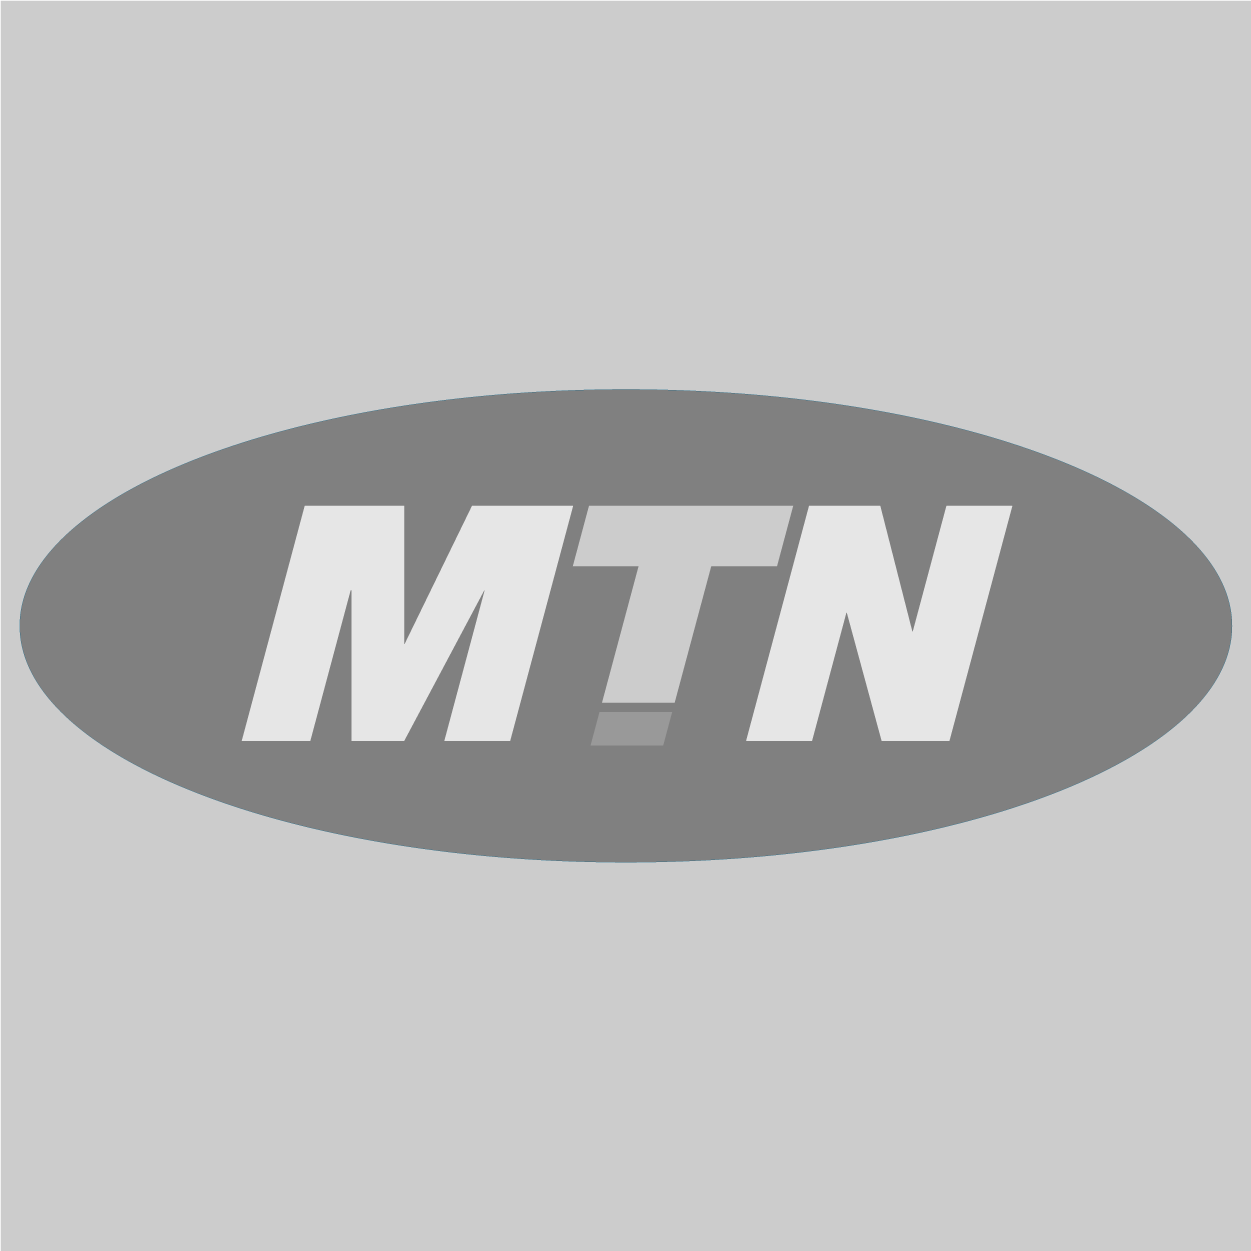 MTN.png